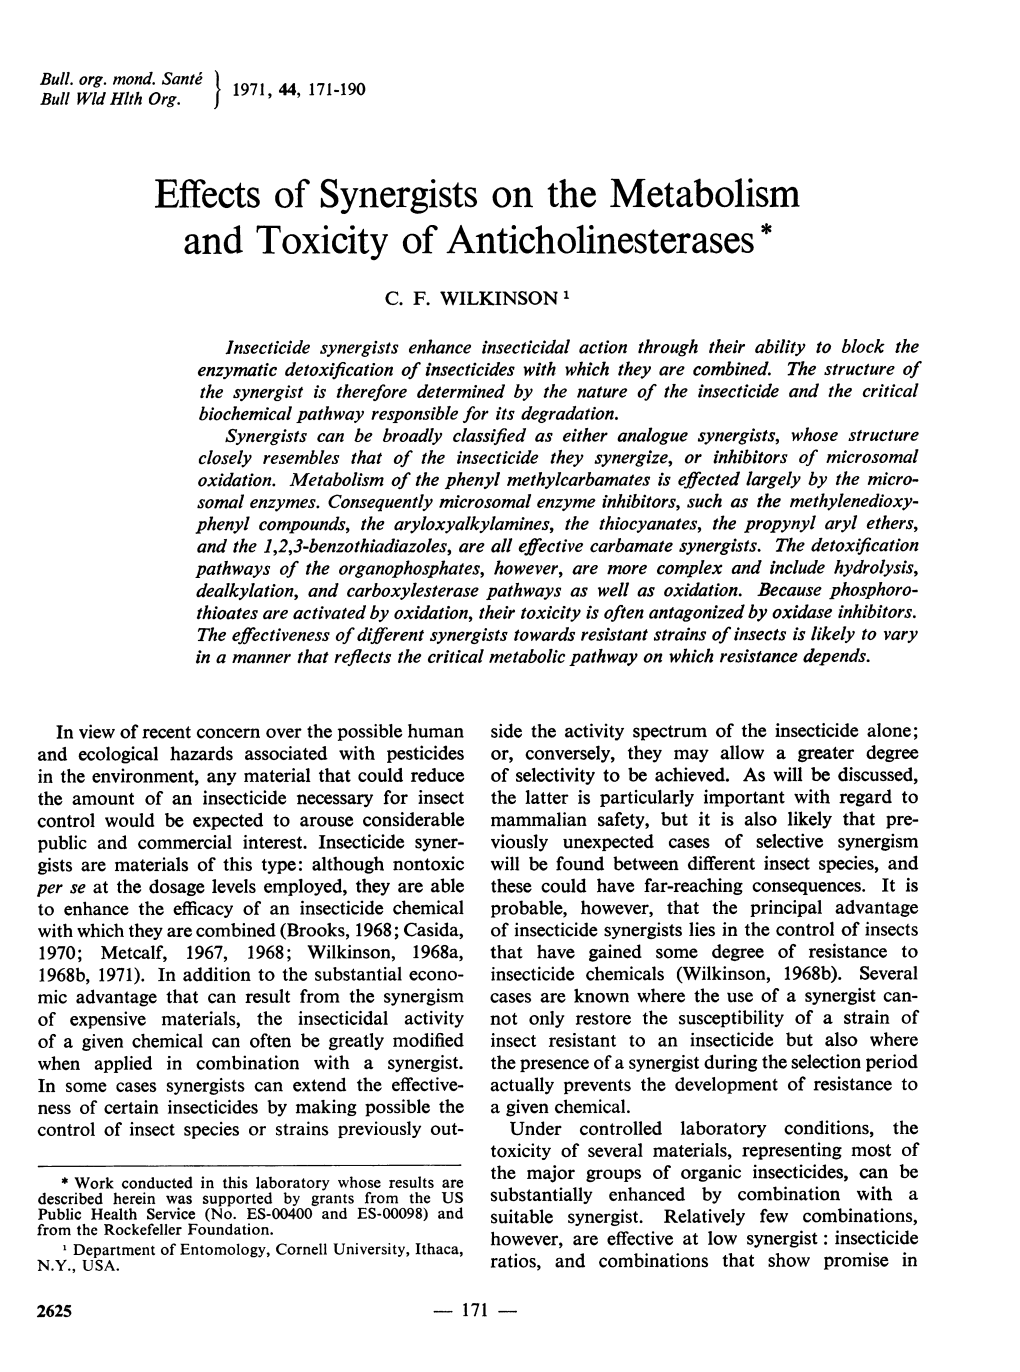 Effects of Synergists on the Metabolism and Toxicity of Anticholinesterases*